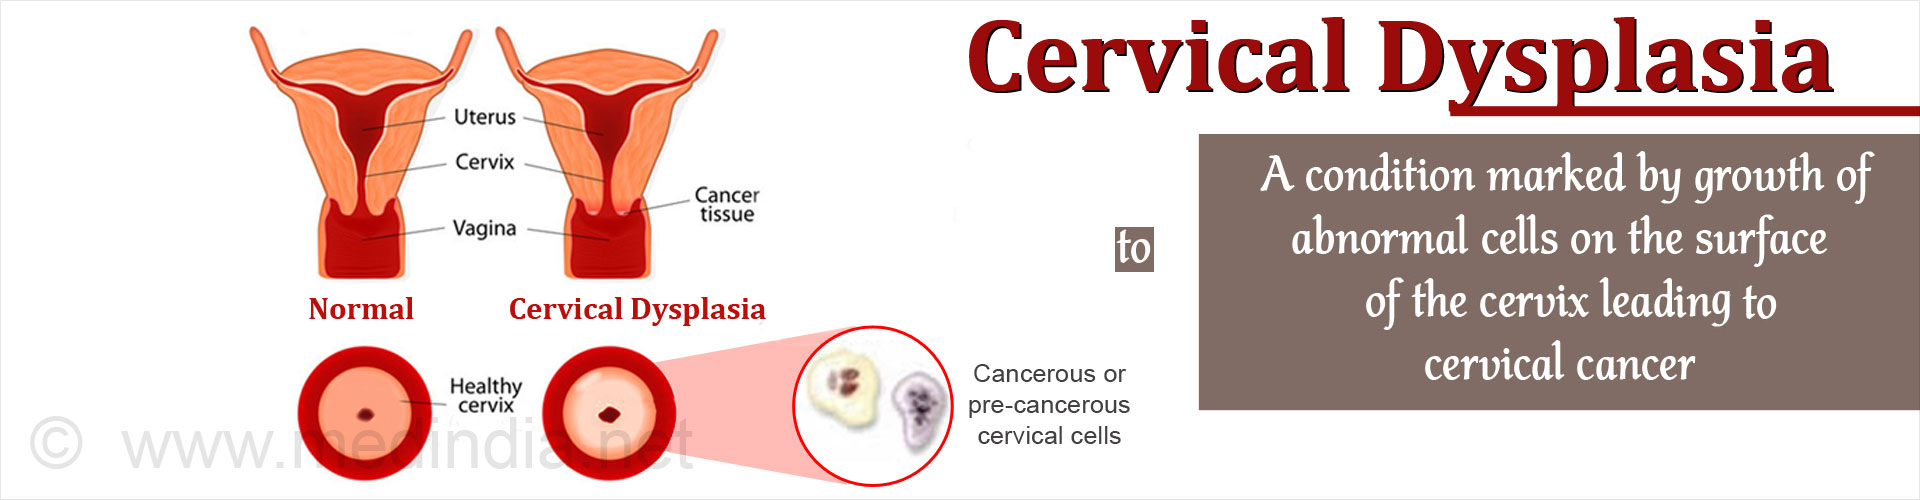 Cervical Cancer Types Causes Symptoms Diagnosis Treatment Complications And Prevention